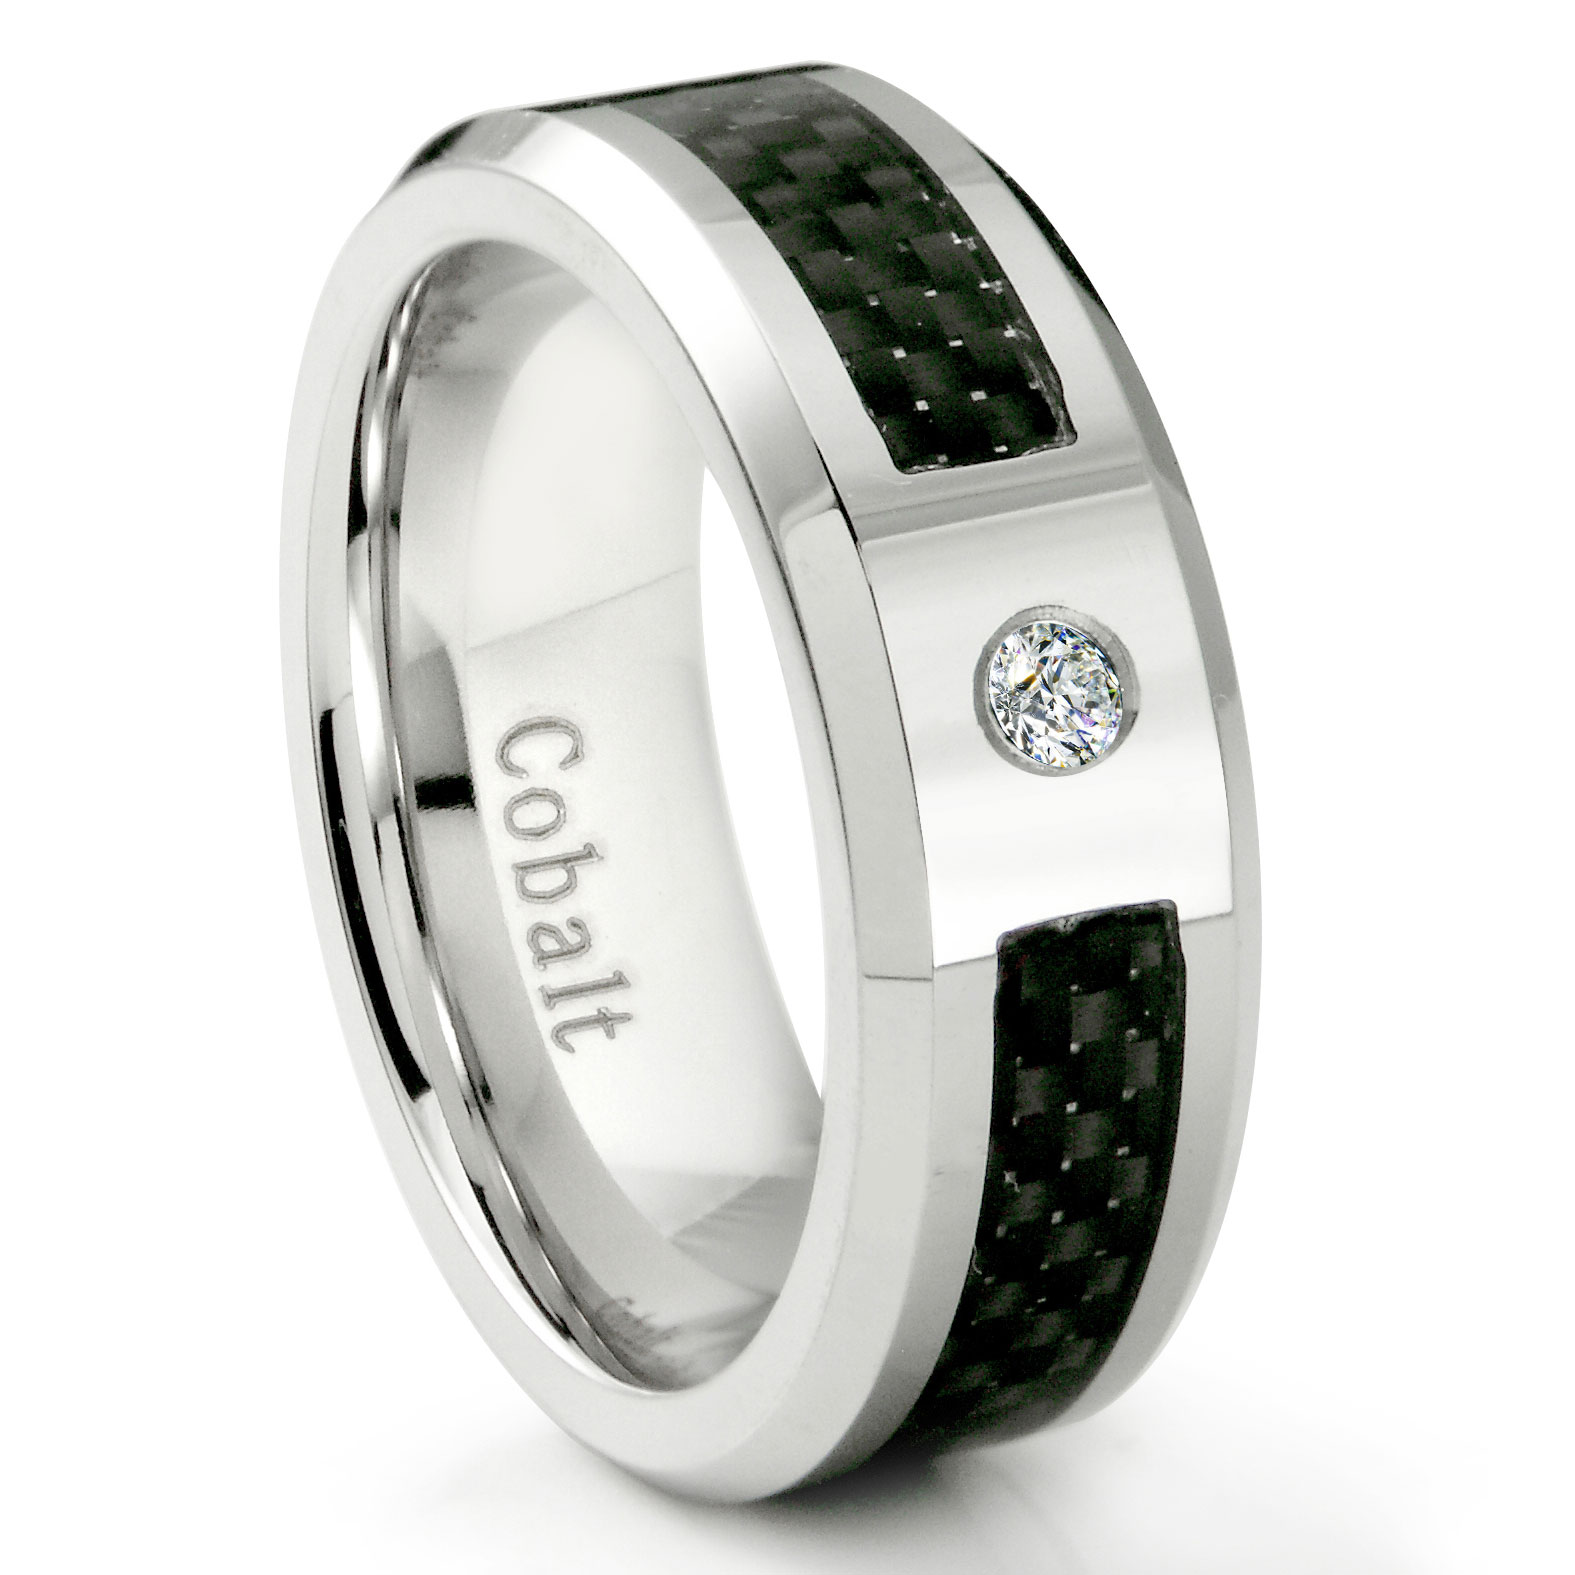 Thorsten Lilac Beveled Black Ceramic Ring with Purple Carbon Fiber Inlay 6mm Wide Wedding Band from Roy Rose Jewelry 